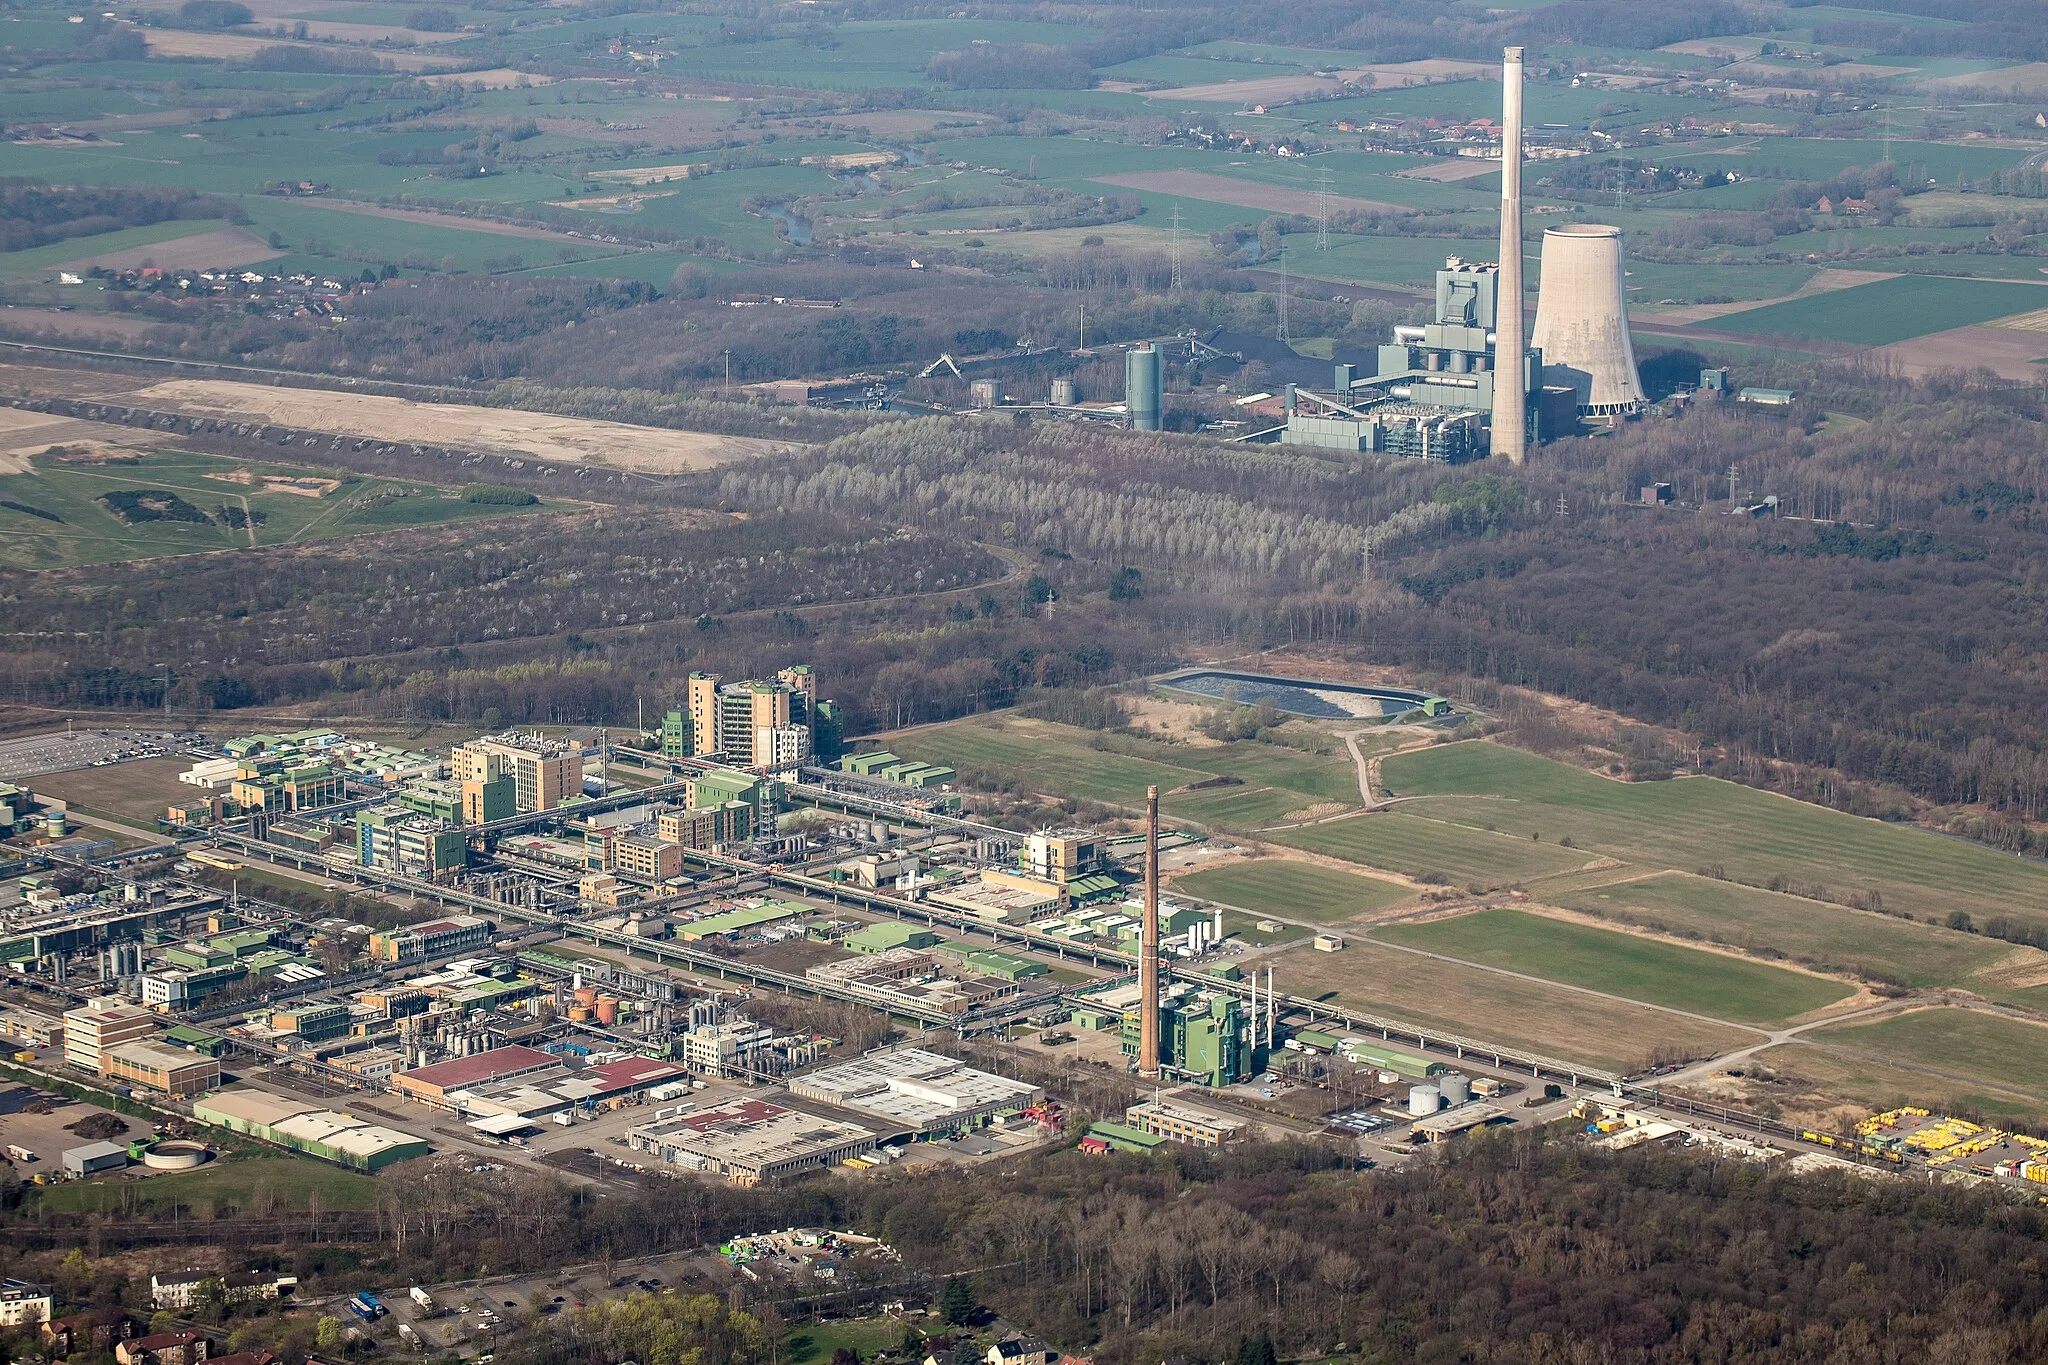 Photo showing: Aerial of industrial sites in Bergkamen, Germany. The plant in the foreground belongs to Bayer Healthcare while the power plant Bergkamen is visible in the background.